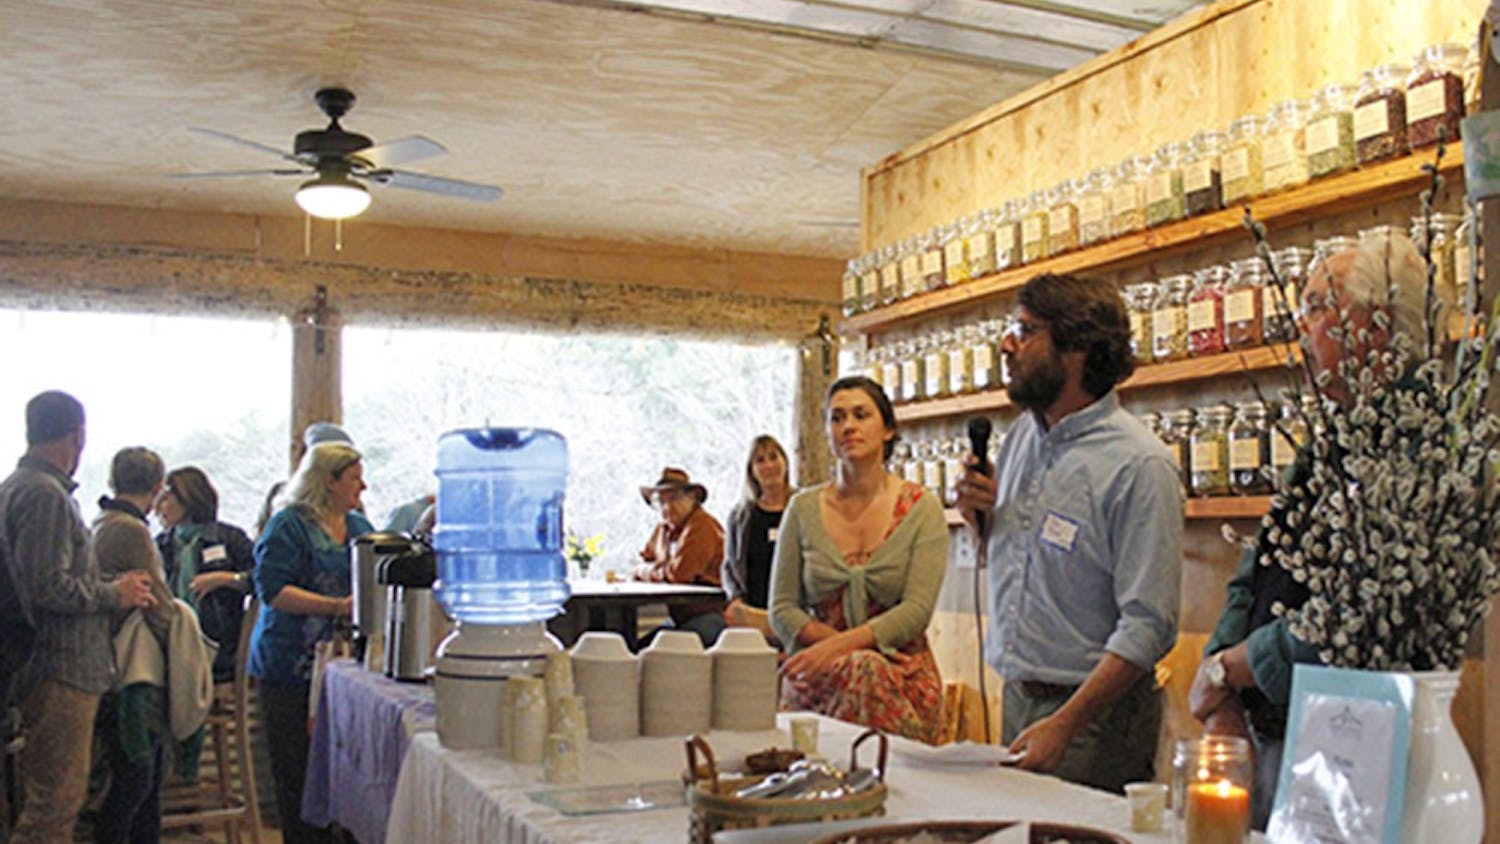 Tim & Megan Toben speak to friends and supporters of their project, The Honeysuckle Tea House outside of Carrboro in Chapel Hill, on Saturday March 22nd 2014. The Tea House is a collaborative project that began with a kickstarter page. It's set to open this March